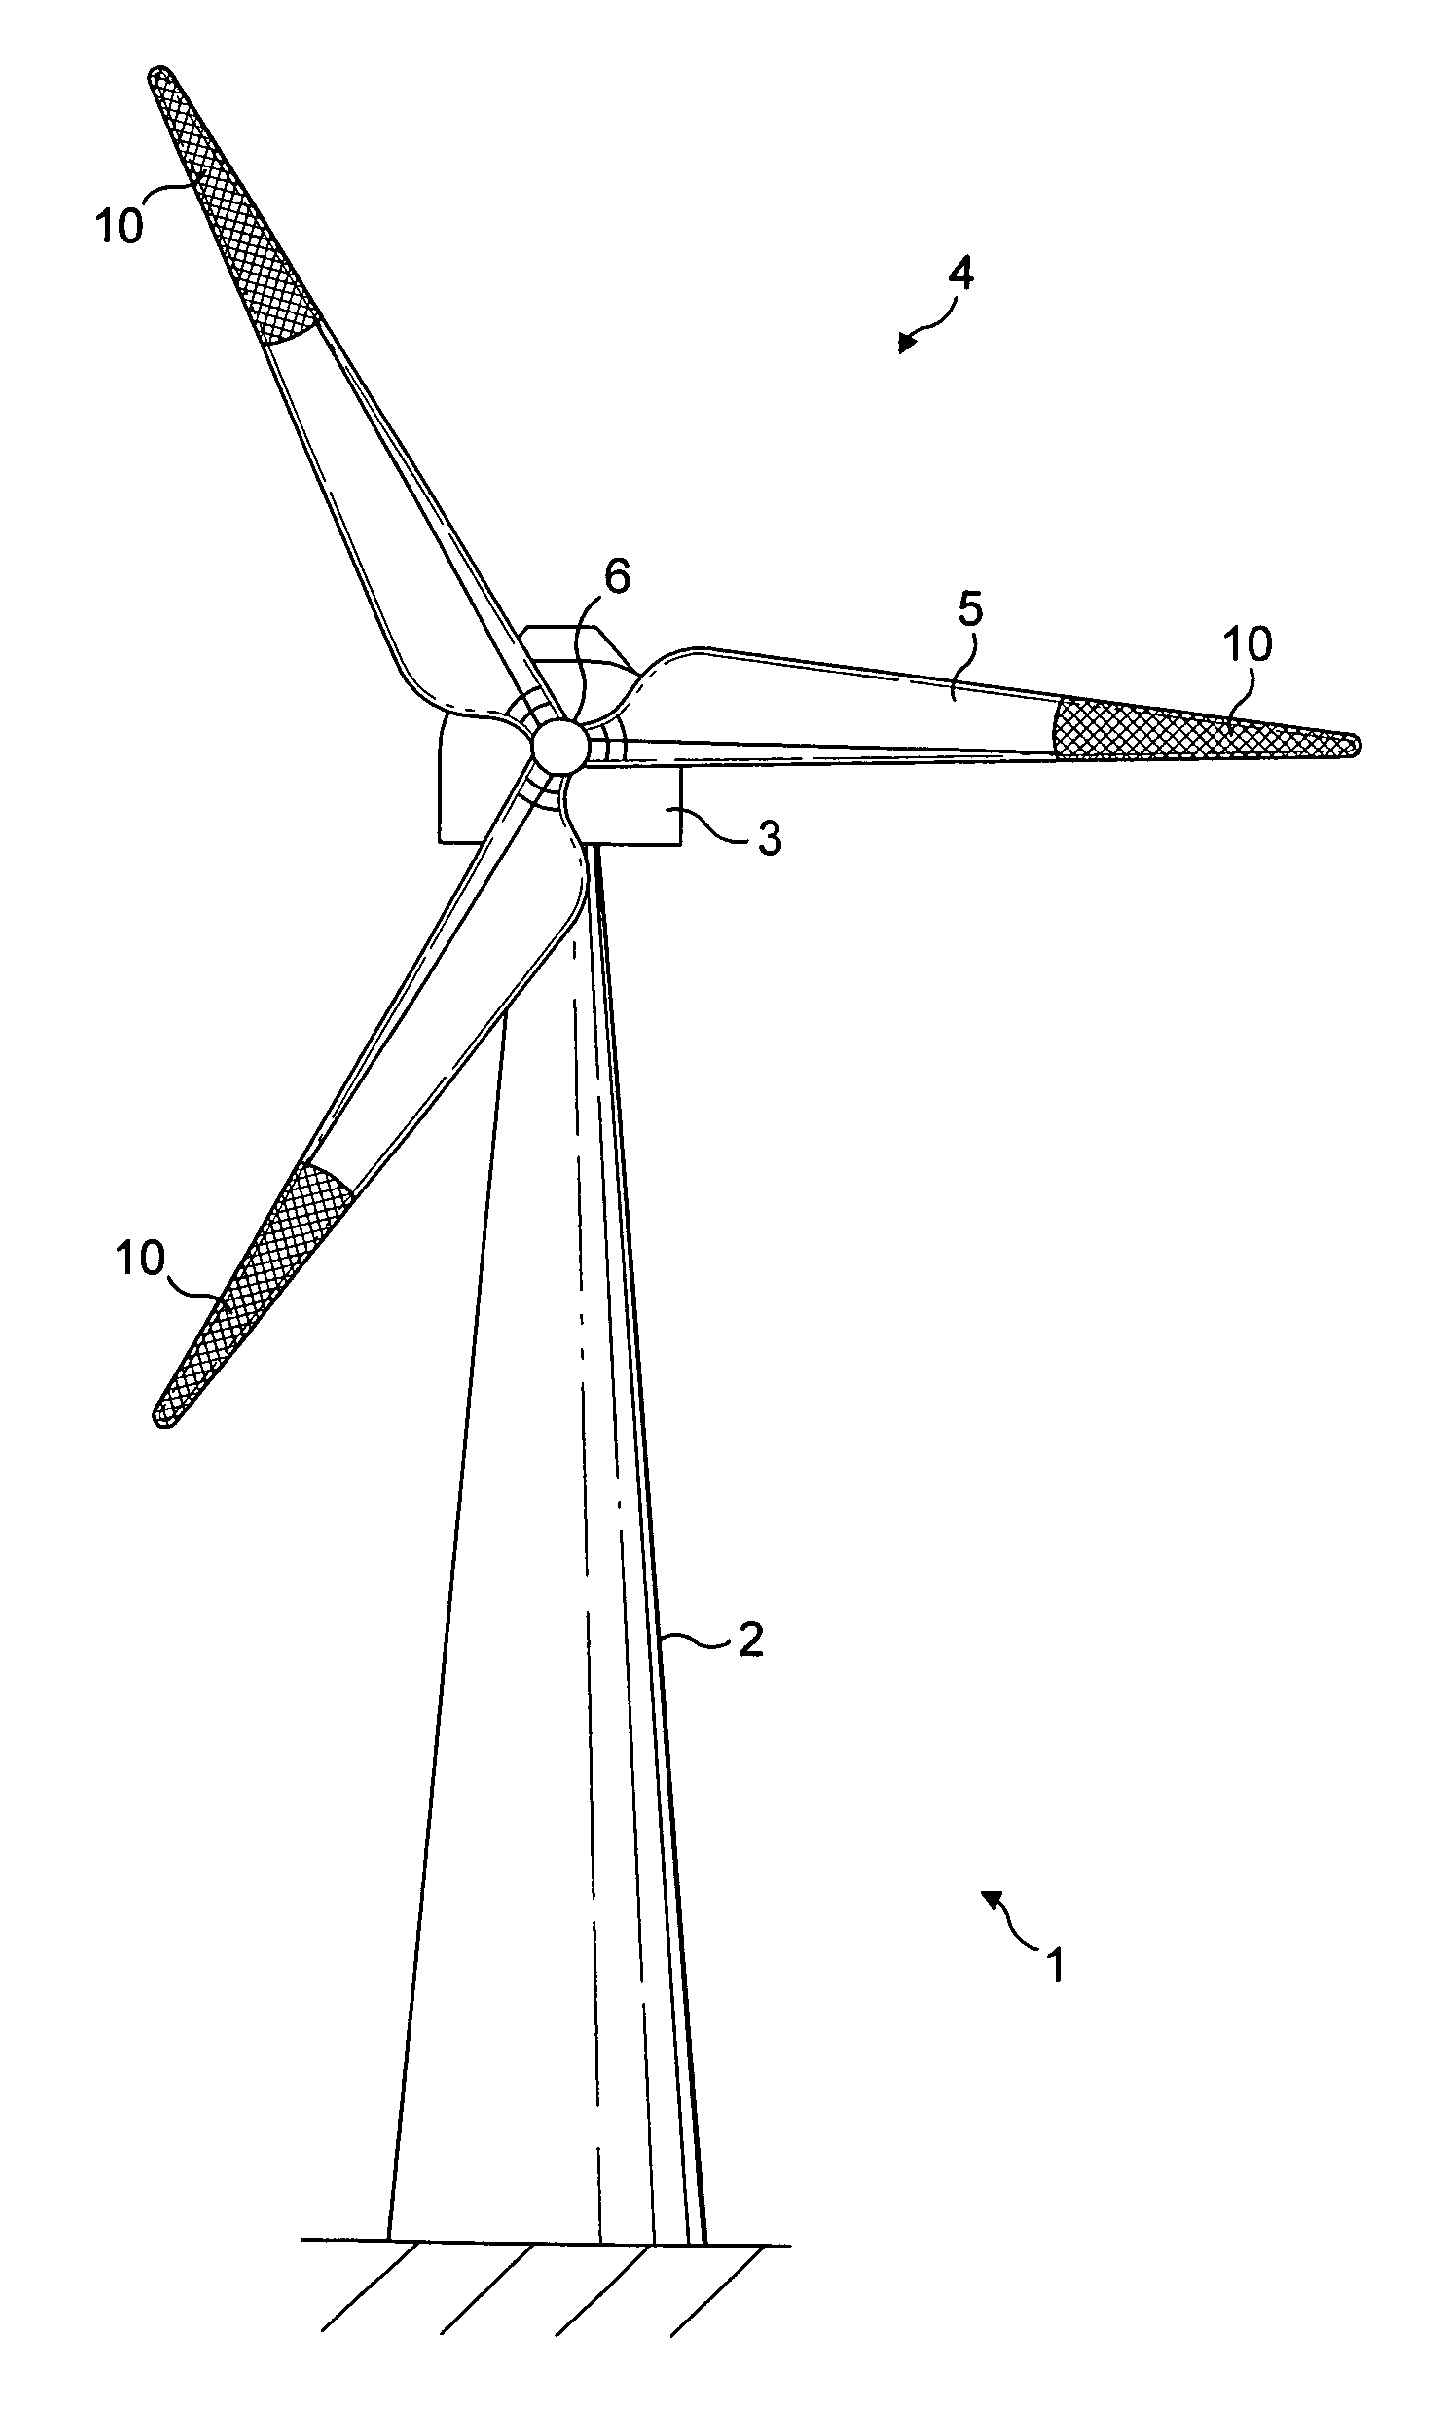 Anti-oscillation apparatus and technique for securing wind turbine blades against oscillations